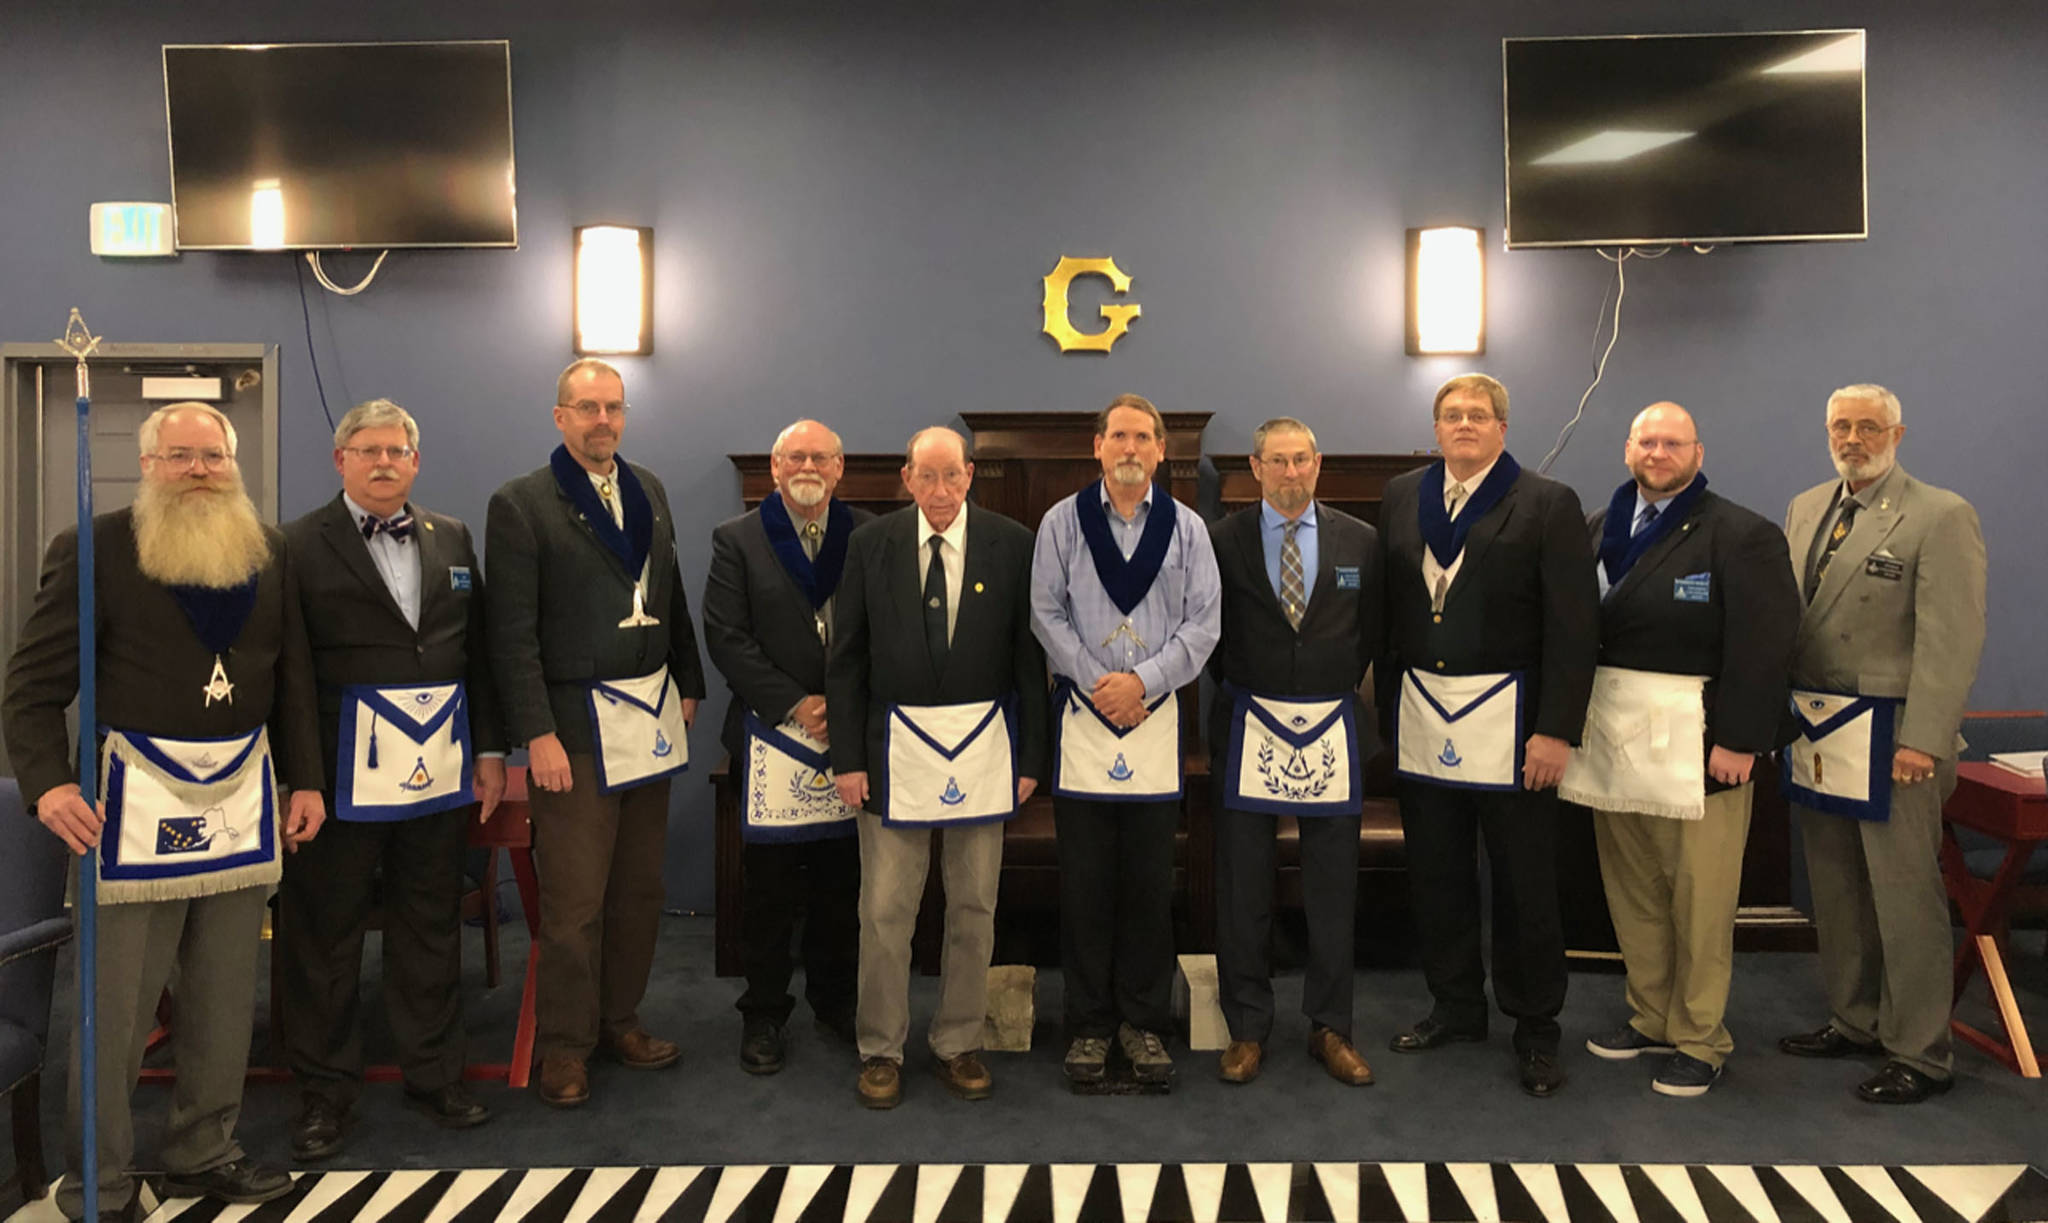 Pictured from left: Ray Rusaw, Allen Bell, Jeff DeFreest, John Barnett, Harley Clough, Dan McCrummen, Bruce Morley, Russ Shivers, Charles Ward and Mer’chant Thompson. Rusaw, DeFreest, Barnett, Clough, McCrummen, Morley, Shivers and Ward are Past Masters of Mt. Juneau-Gastineaux Lodge or one of its predecessor lodges - Mt. Juneau and Gastineaux.